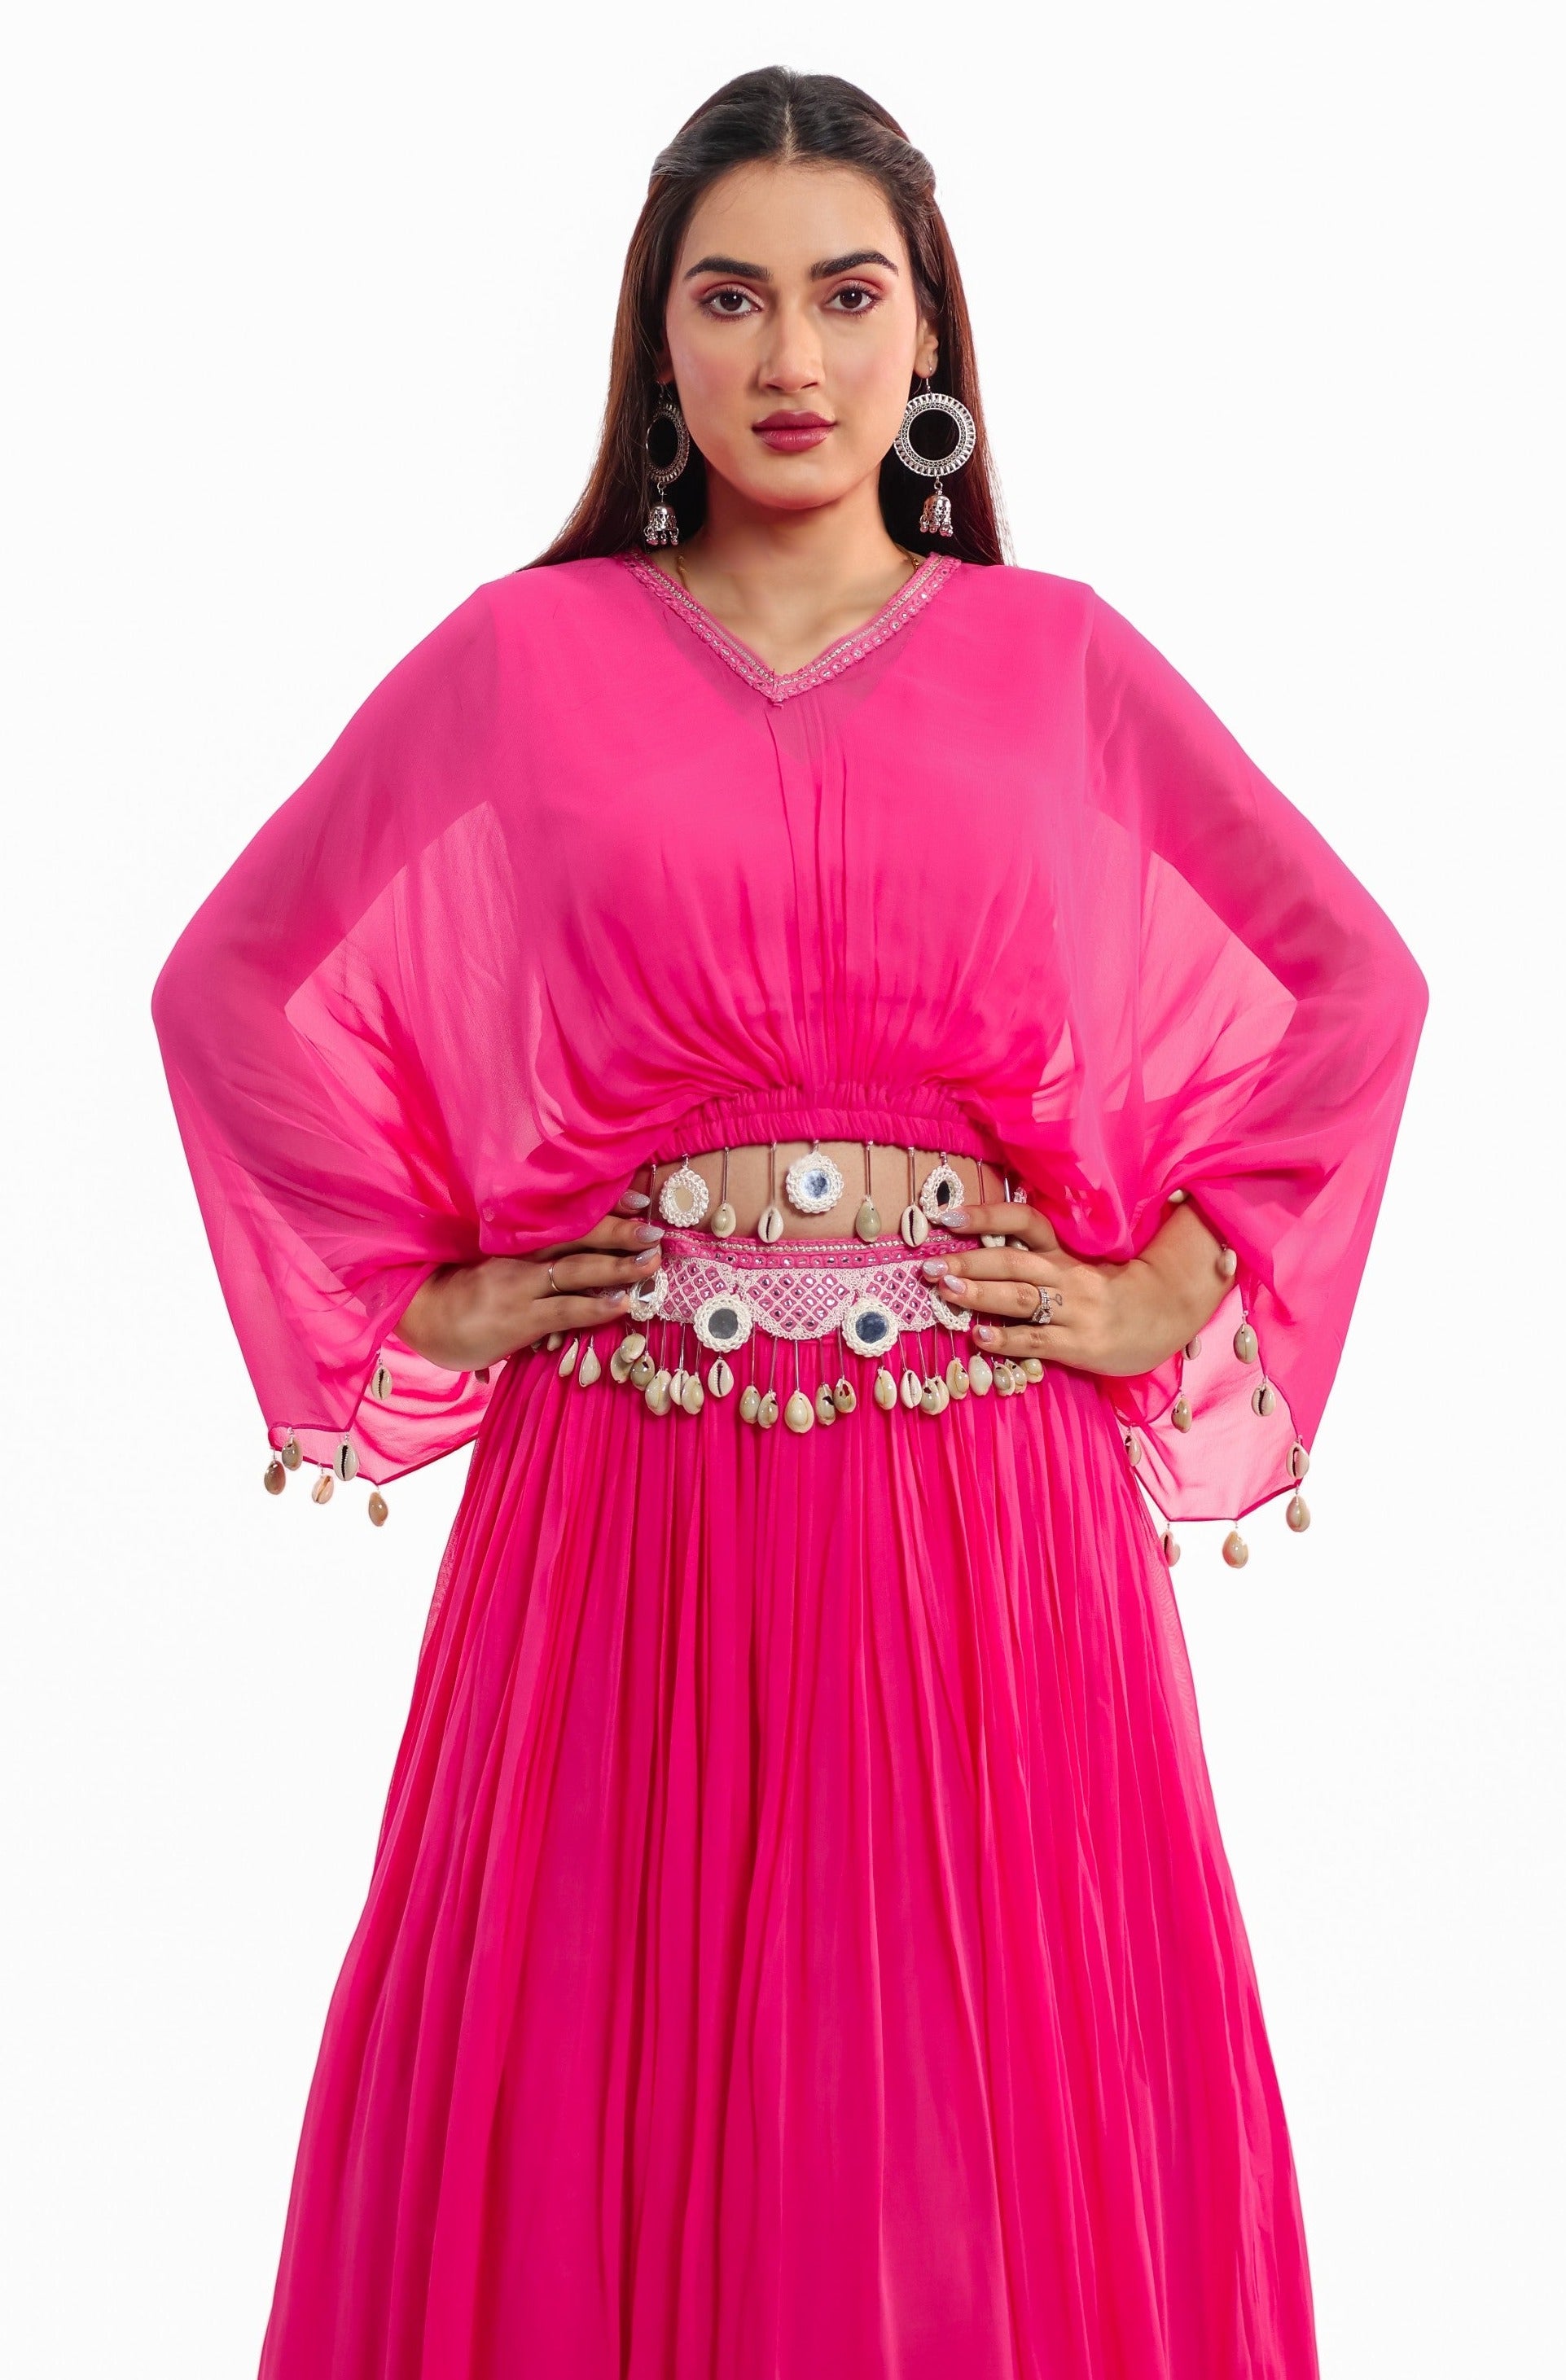 Skirt And Top With Cowrie Shell Detailing  - Sukhmani Gambhir's Choice